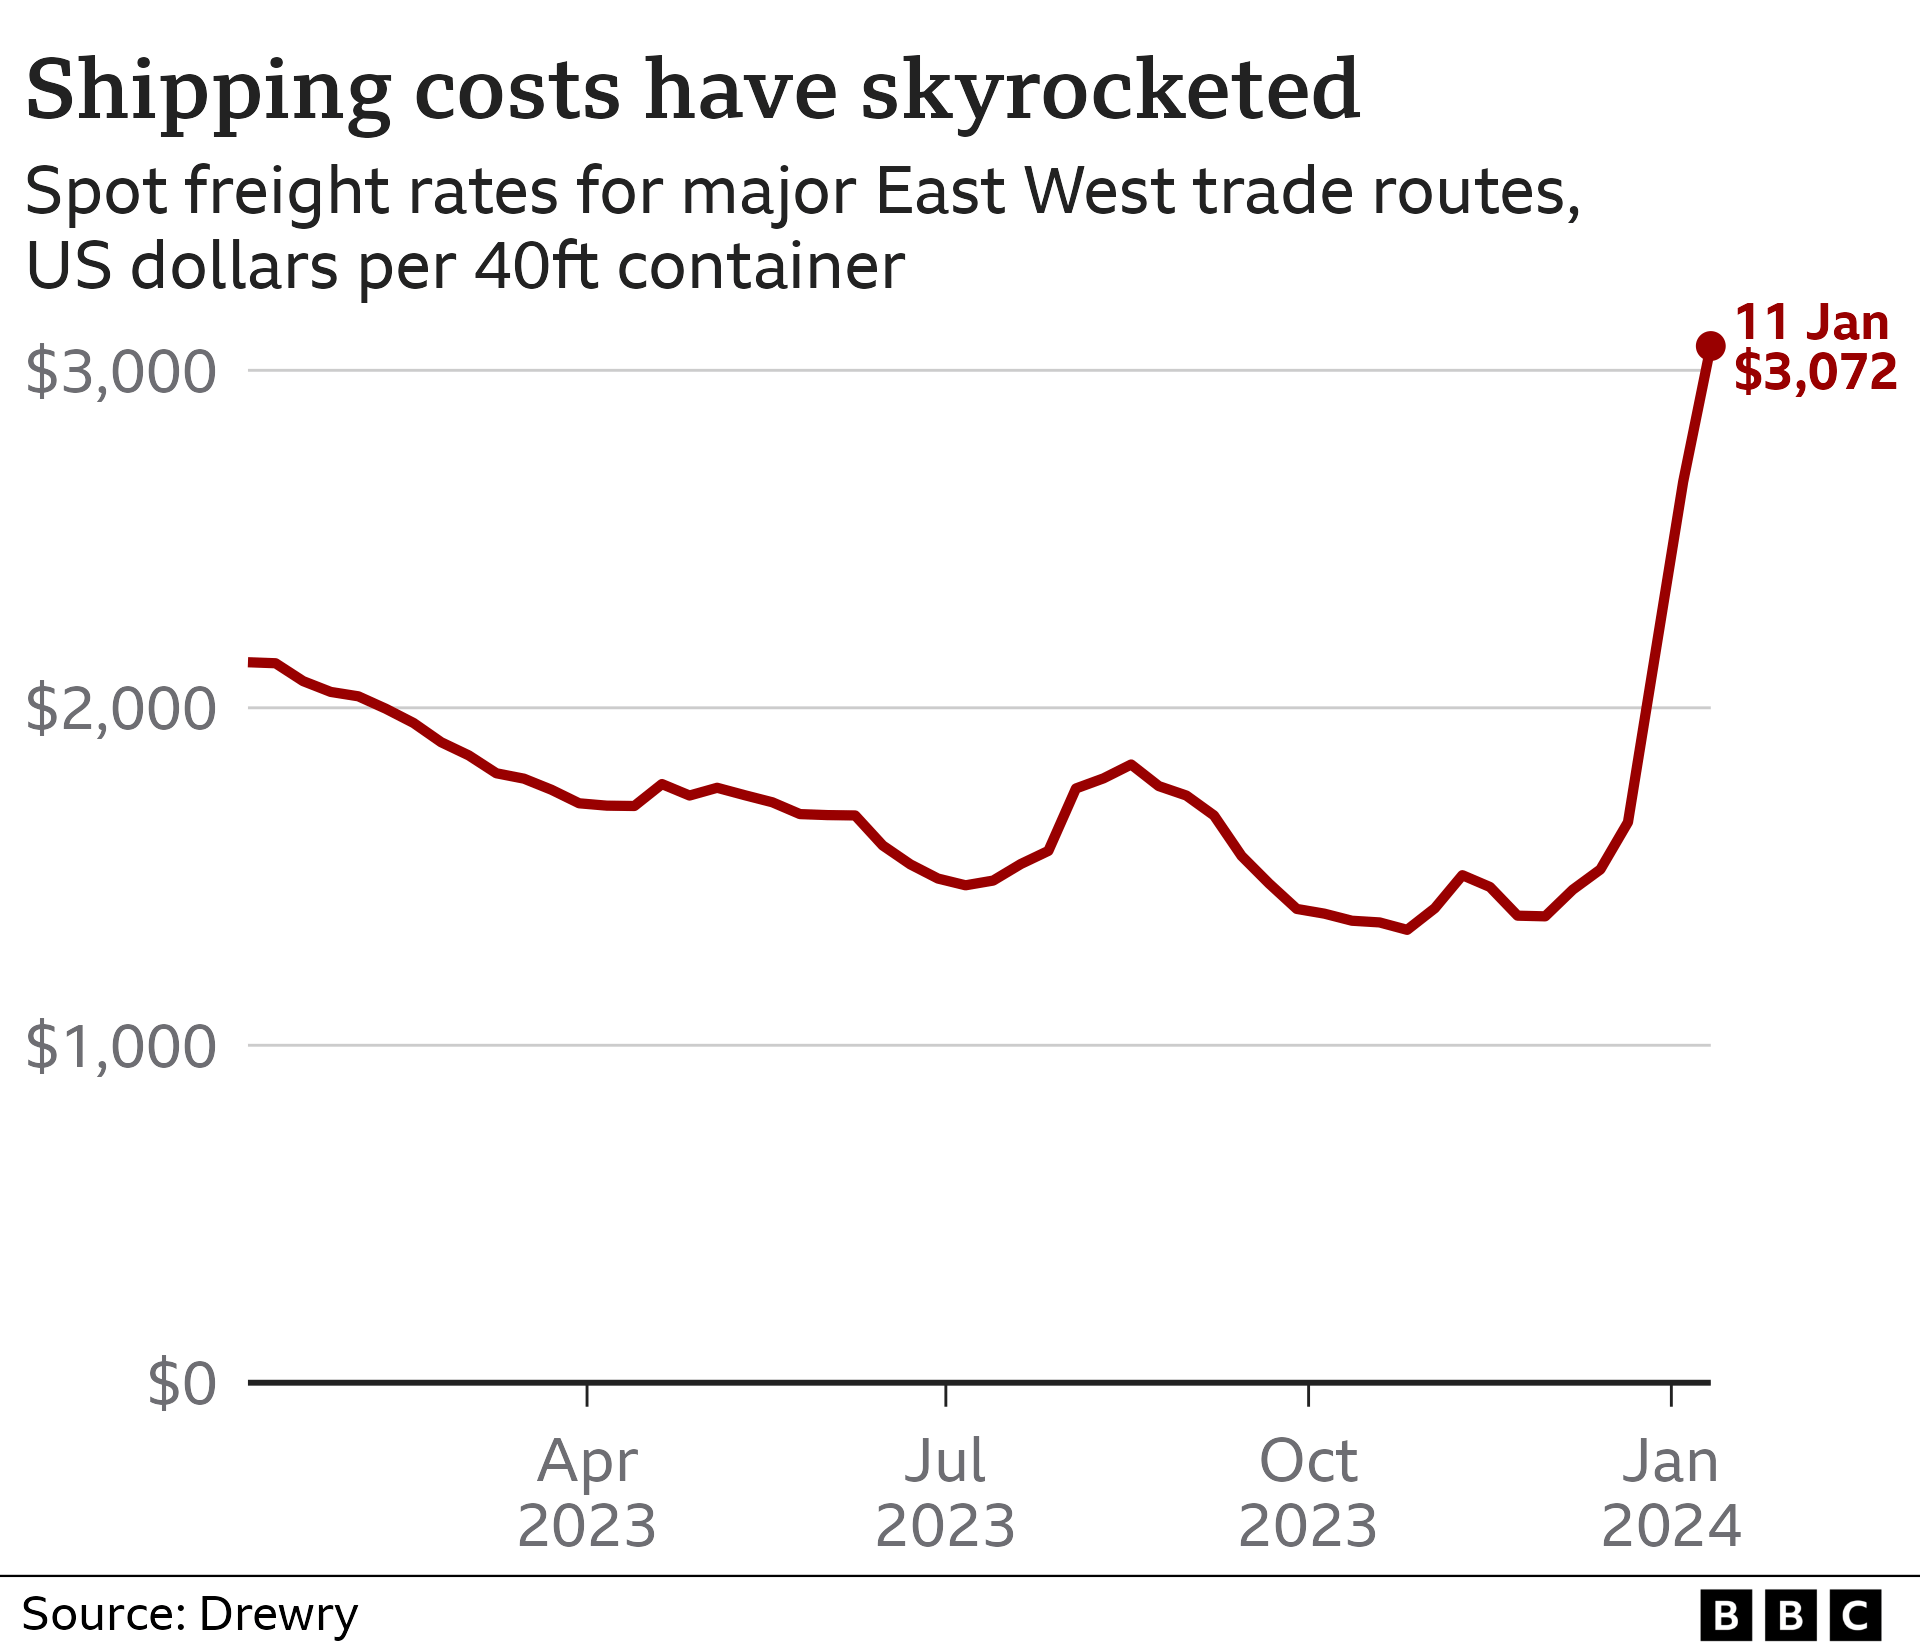 Chart showing shipping costs